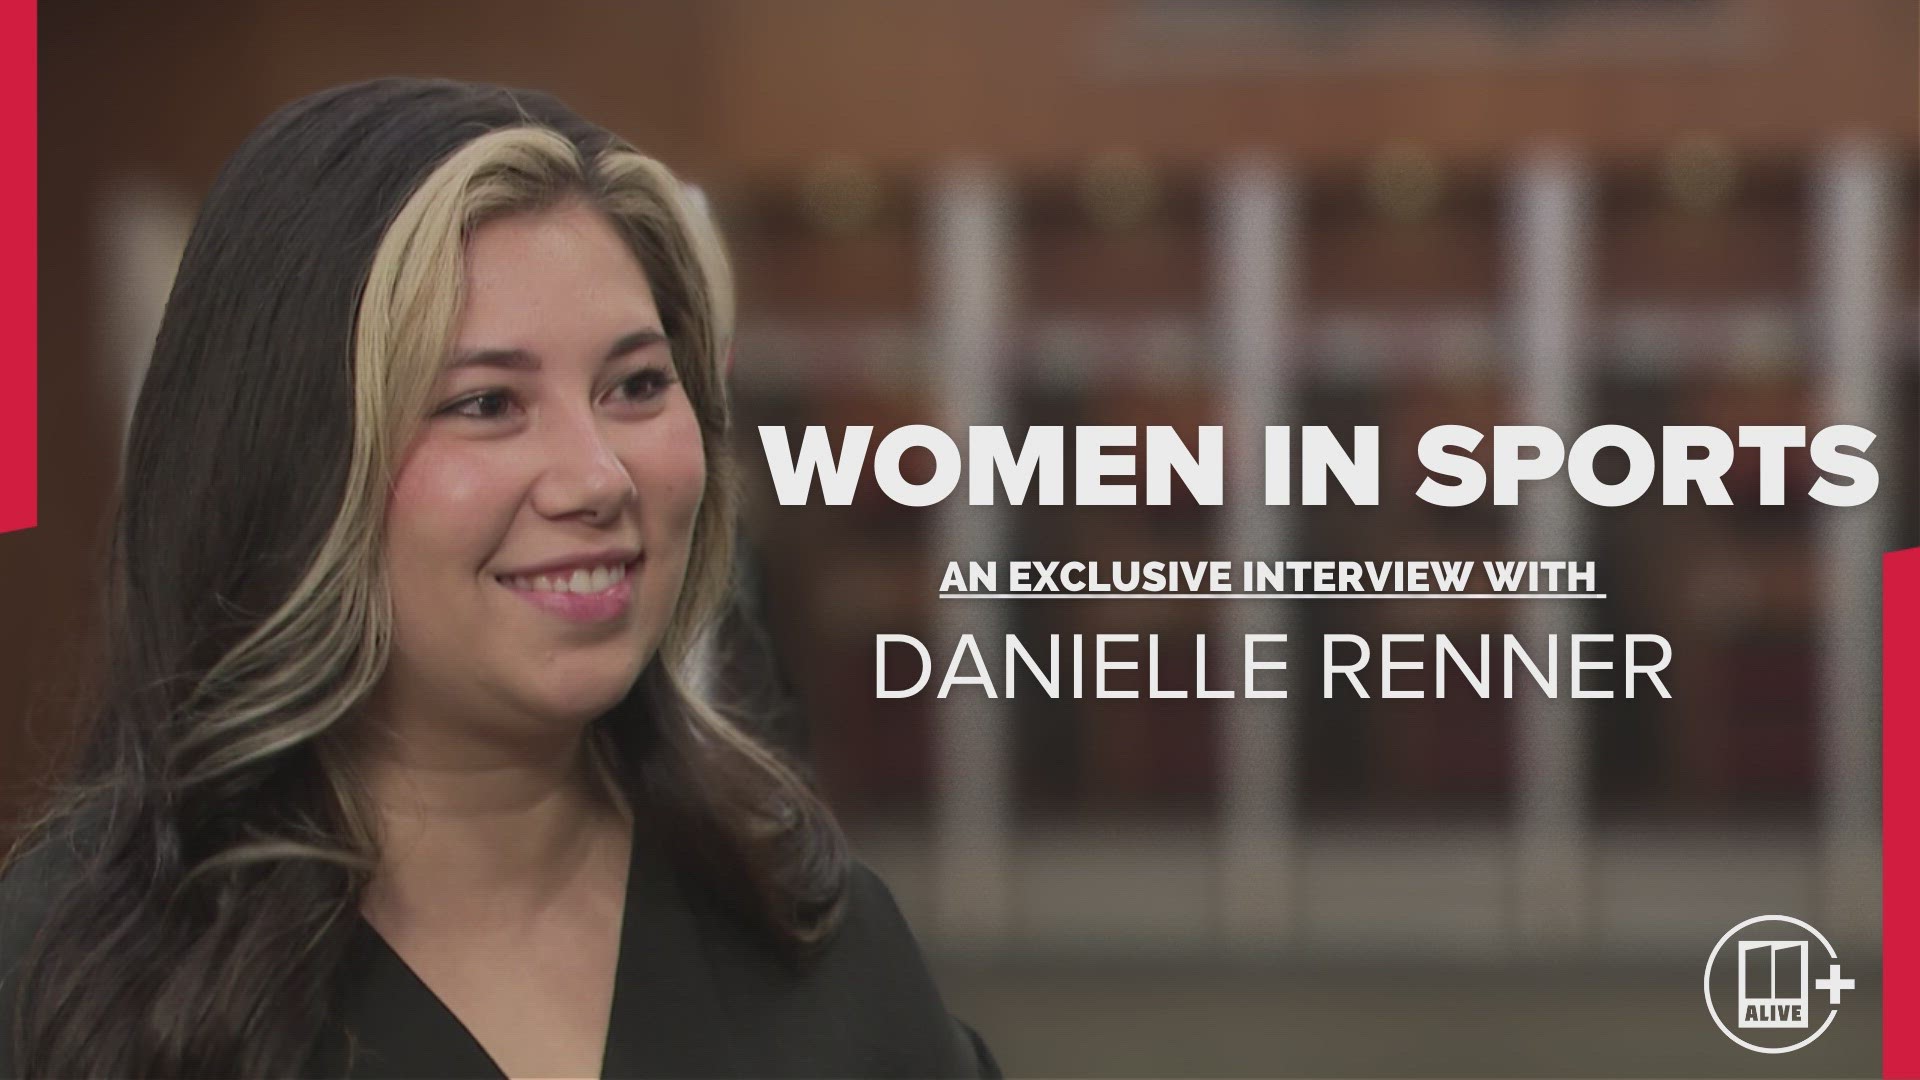 Danielle Renner talks about how she helped pilot a community flag football program for young women that changed her world.